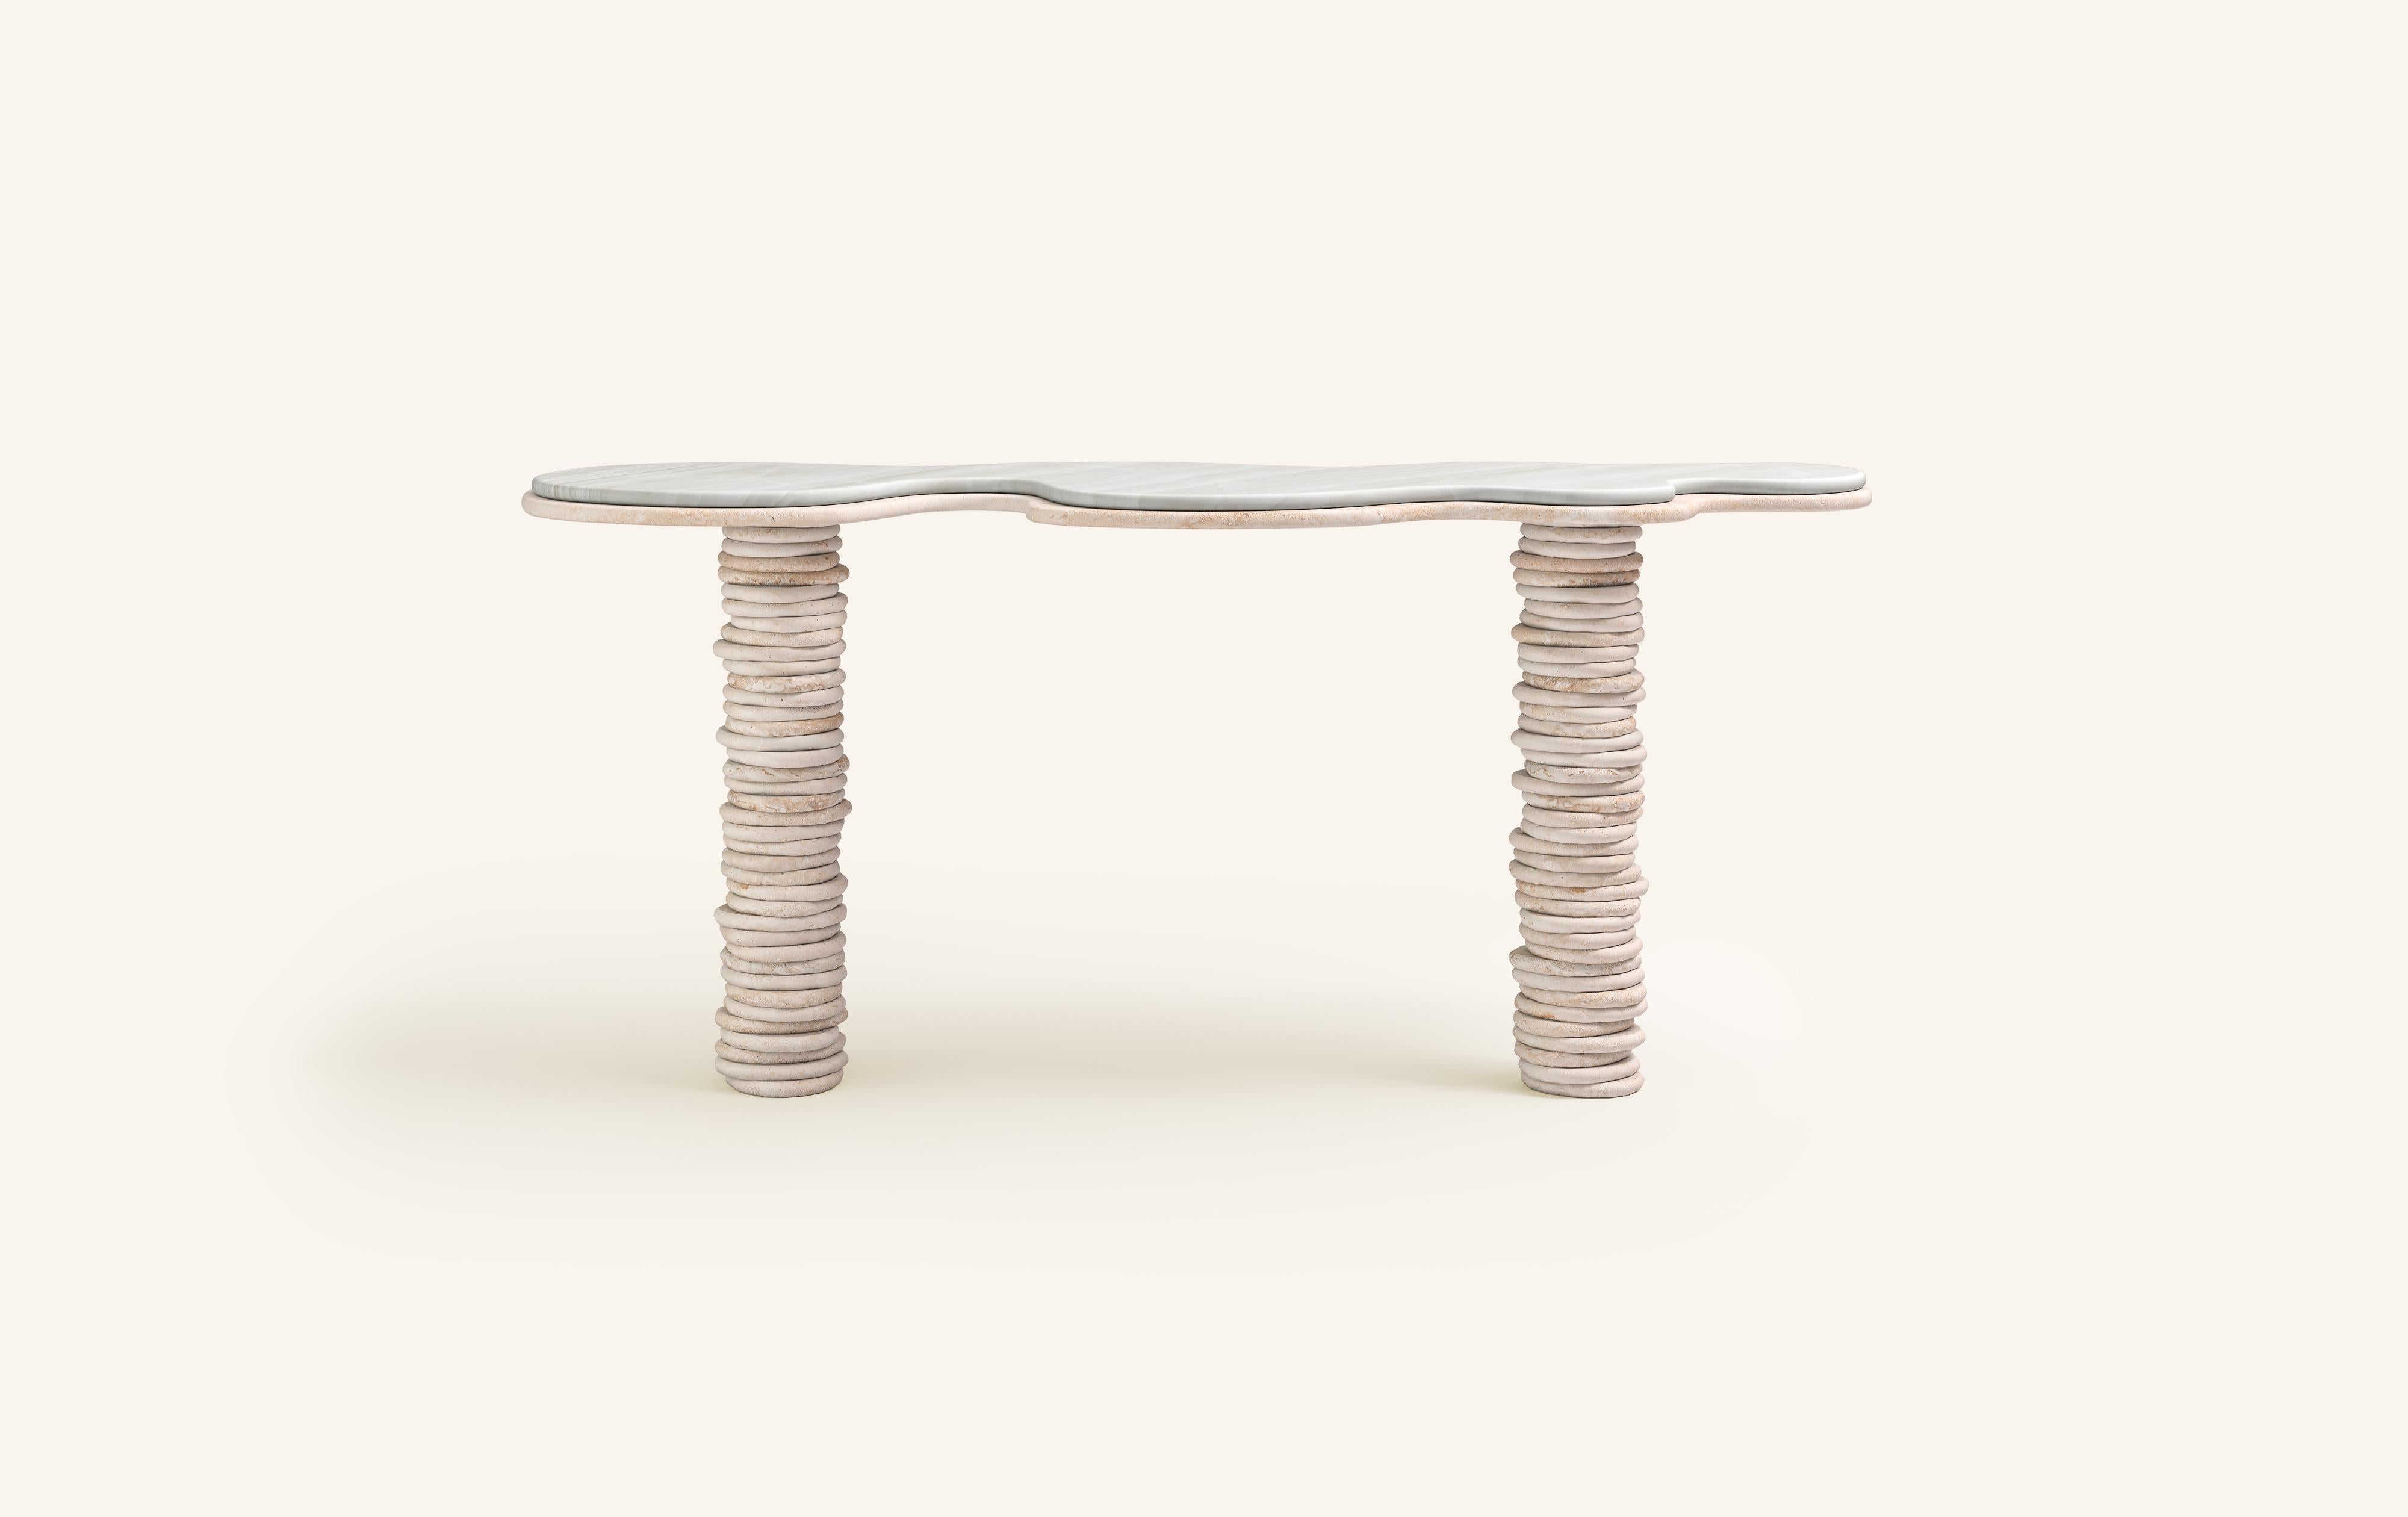 'ONDA', ITALIAN FOR 'WAVE', HAS INSPIRED A FREEFORM ORGANIC BODY, HEROING A COMPLEX AND TEXTURED COLLECTION. COMPRISING SIDE TABLES FOR LAYERING, COFFEE TABLES AND DINING TABLES.

DIMENSIONS:
72”L x 21”W x 29-3/4”H: 
- 1.5